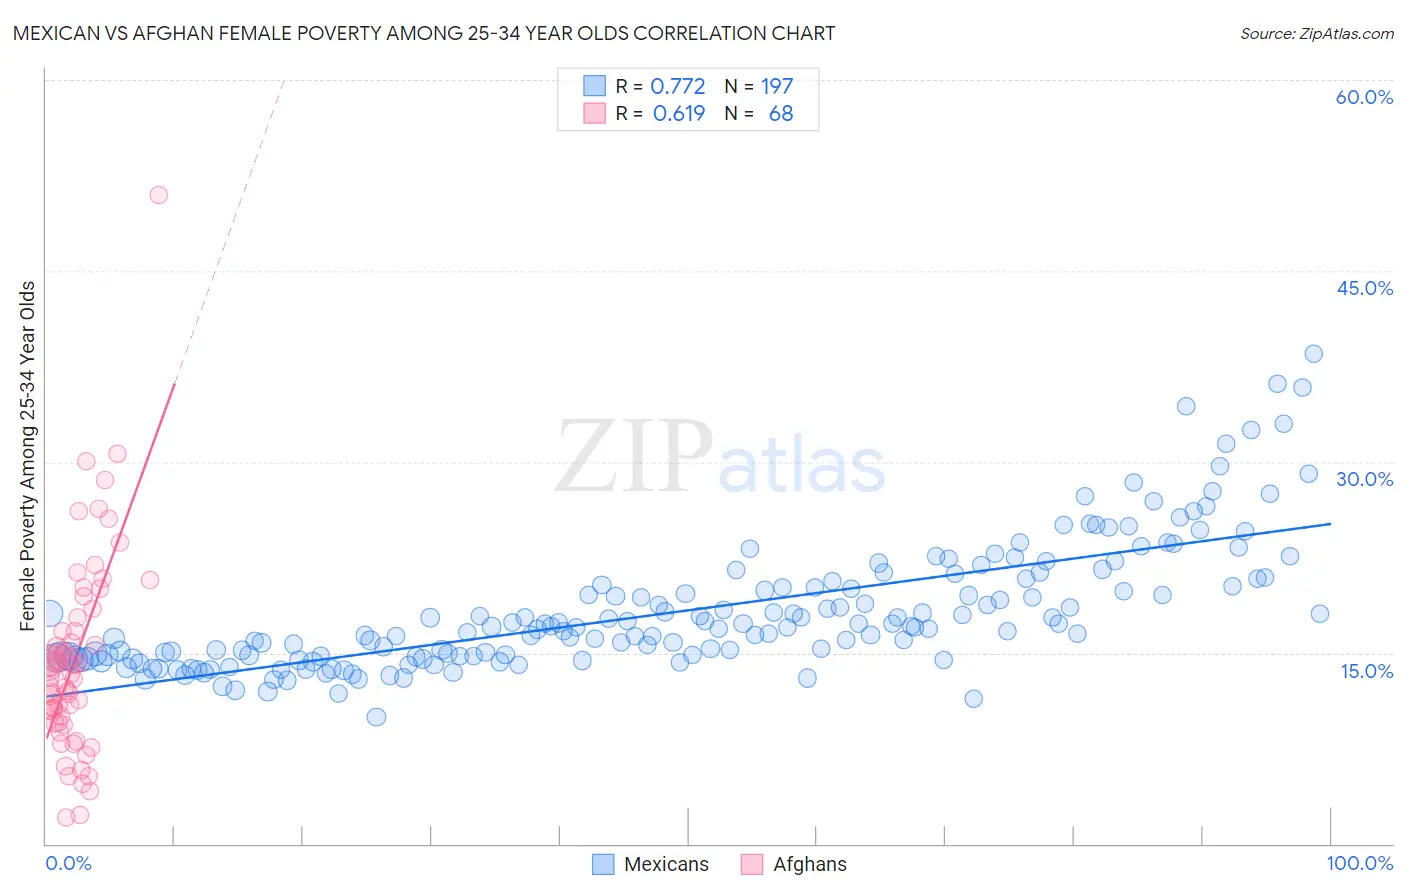 Mexican vs Afghan Female Poverty Among 25-34 Year Olds